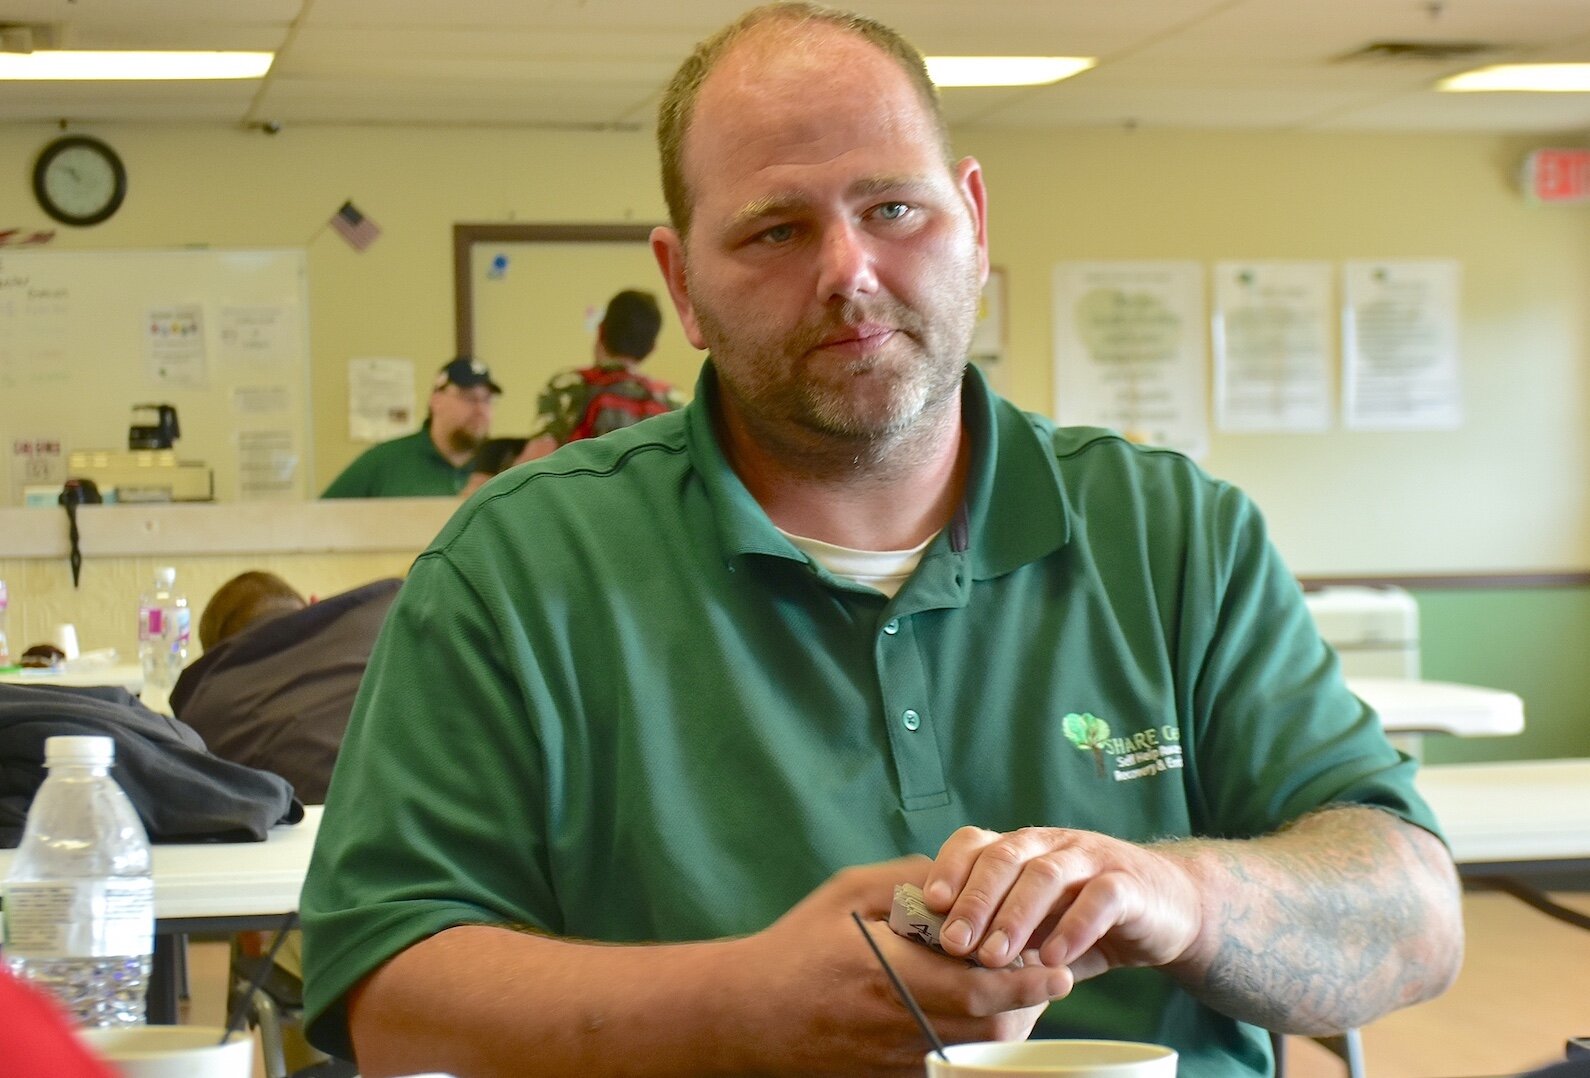 Matt Jones is Peer Support and Recovery Coach for the SHARE Center, a drop-in center near downtown Battle Creek.